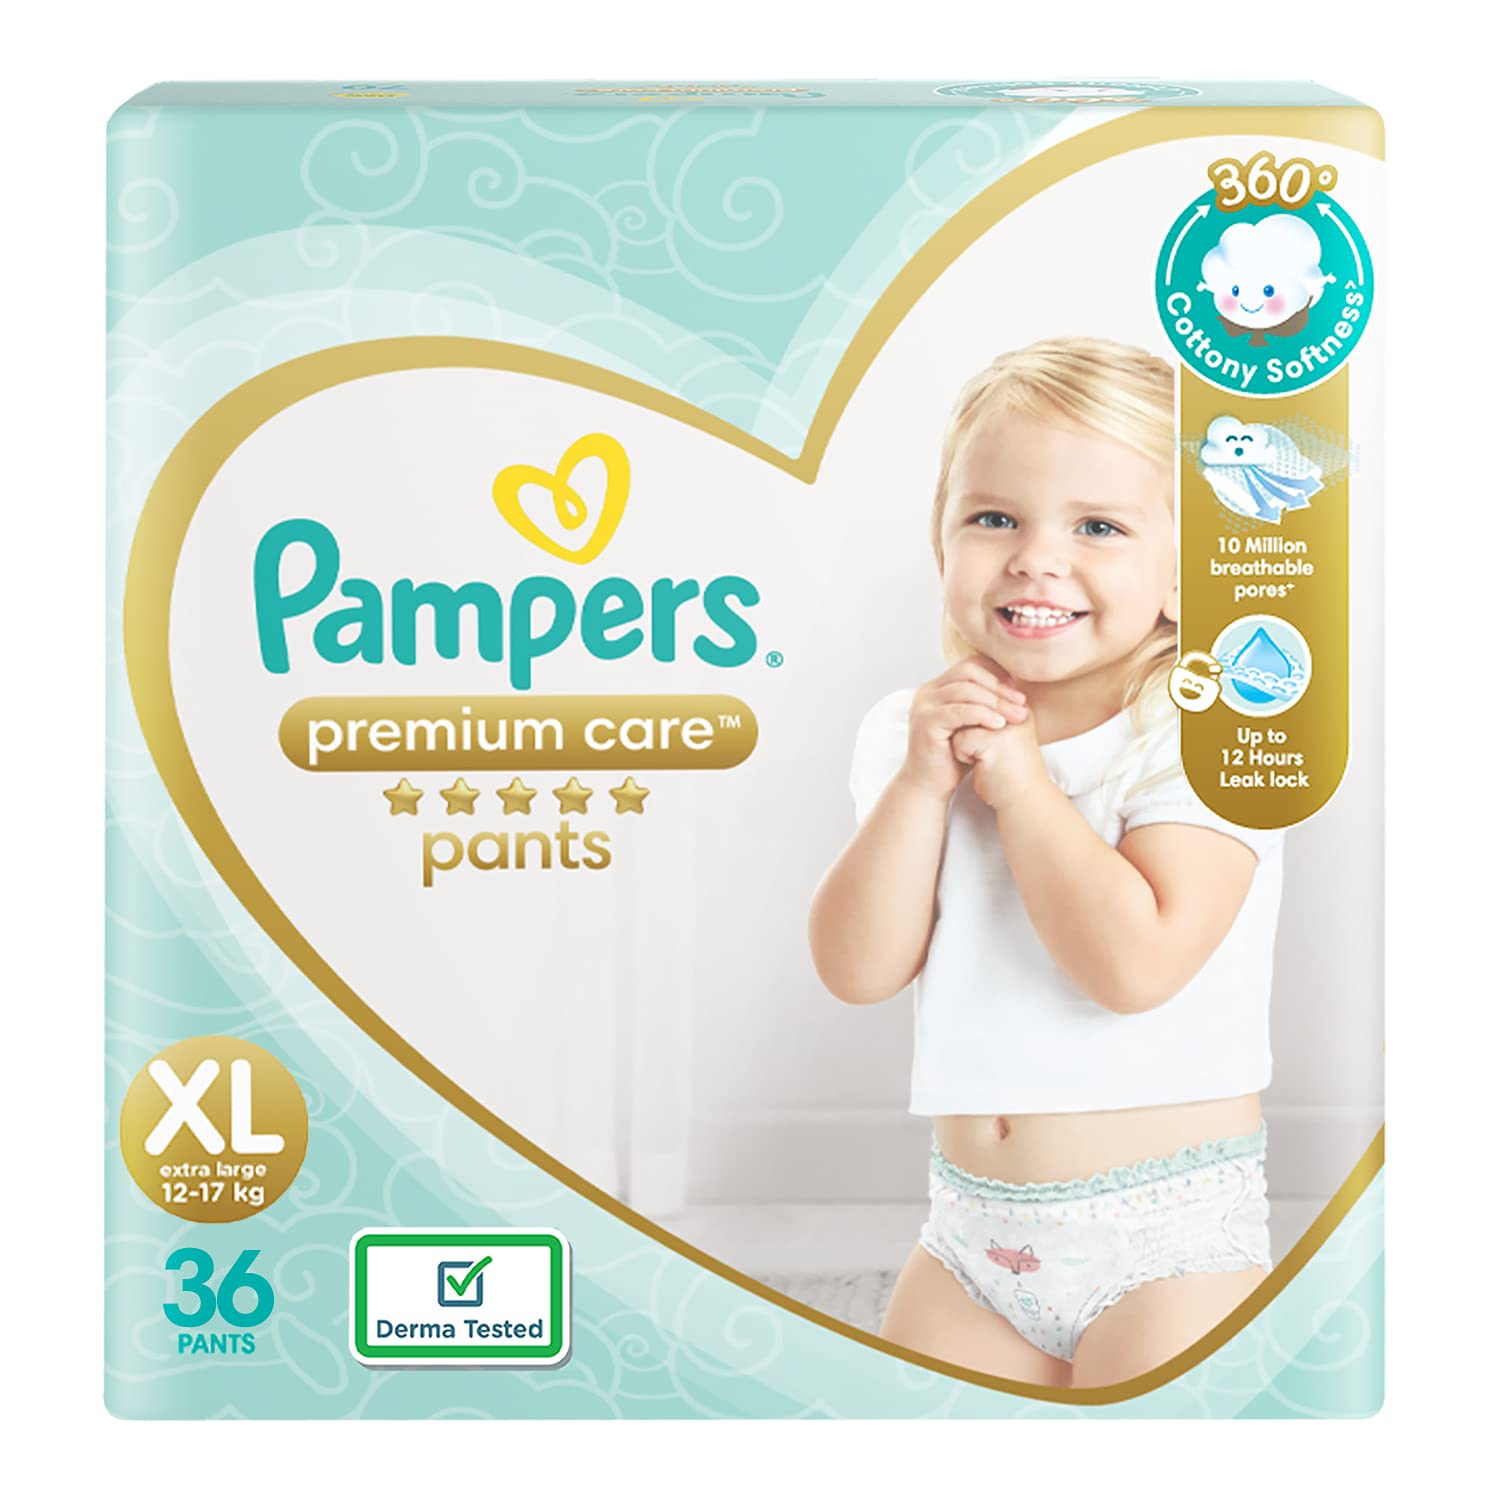 Pampers Premium Care Pants, Extra Large size baby diapers (XL